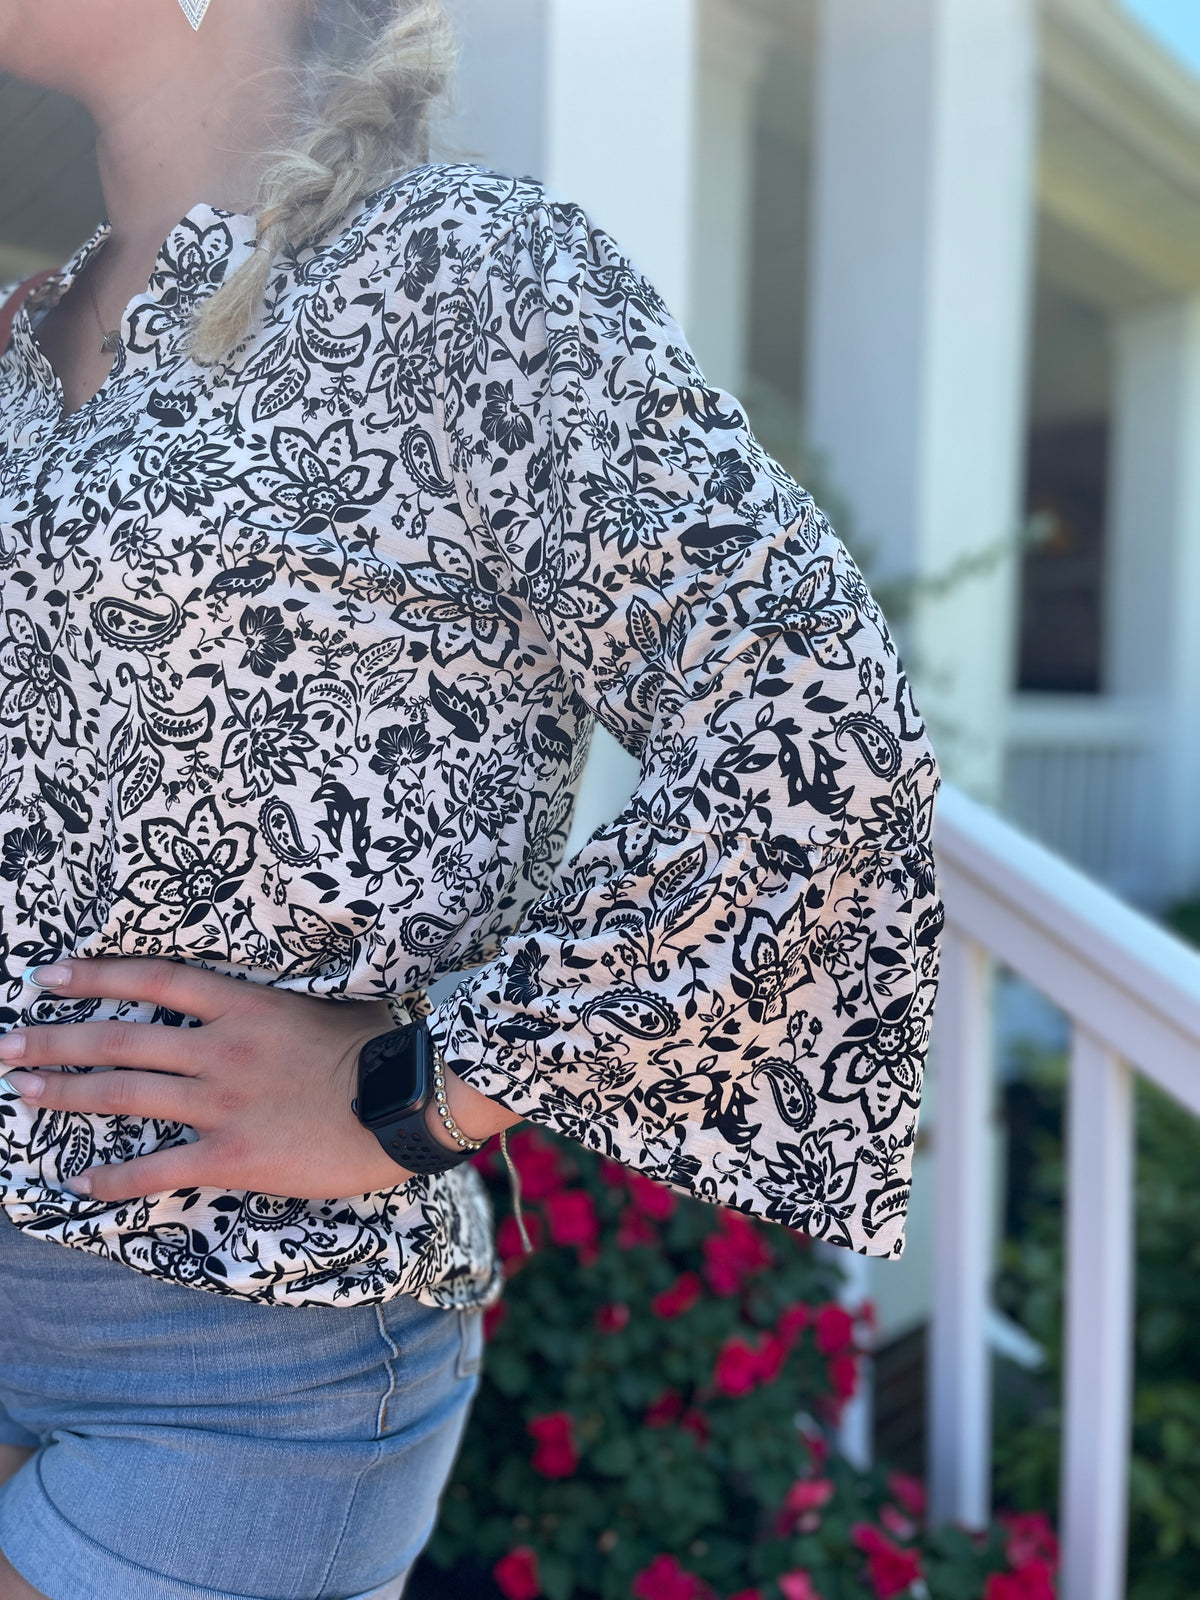 TAUPE/BLACK FLORAL/PAISLEY TOP